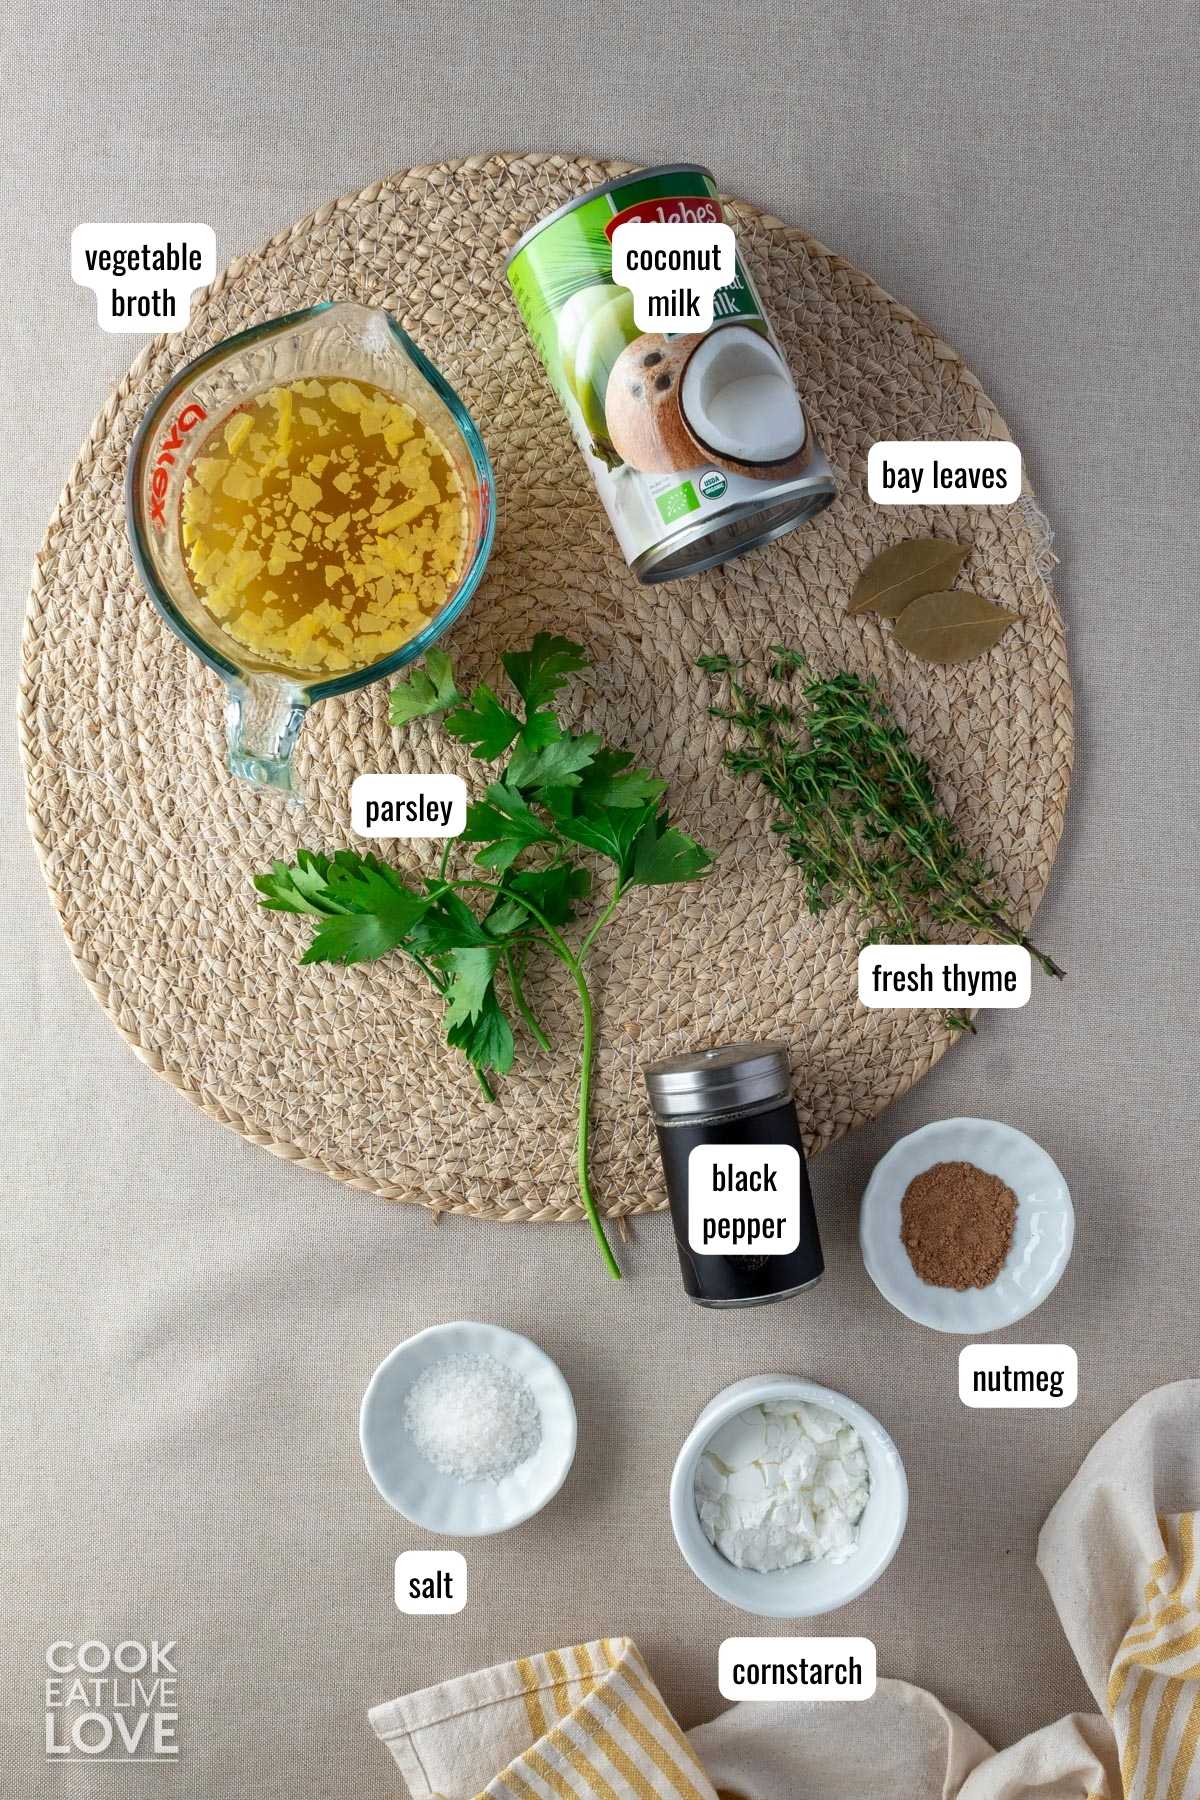 Ingredients to make vegan bechamel sauce with text labels on the table before mixing.